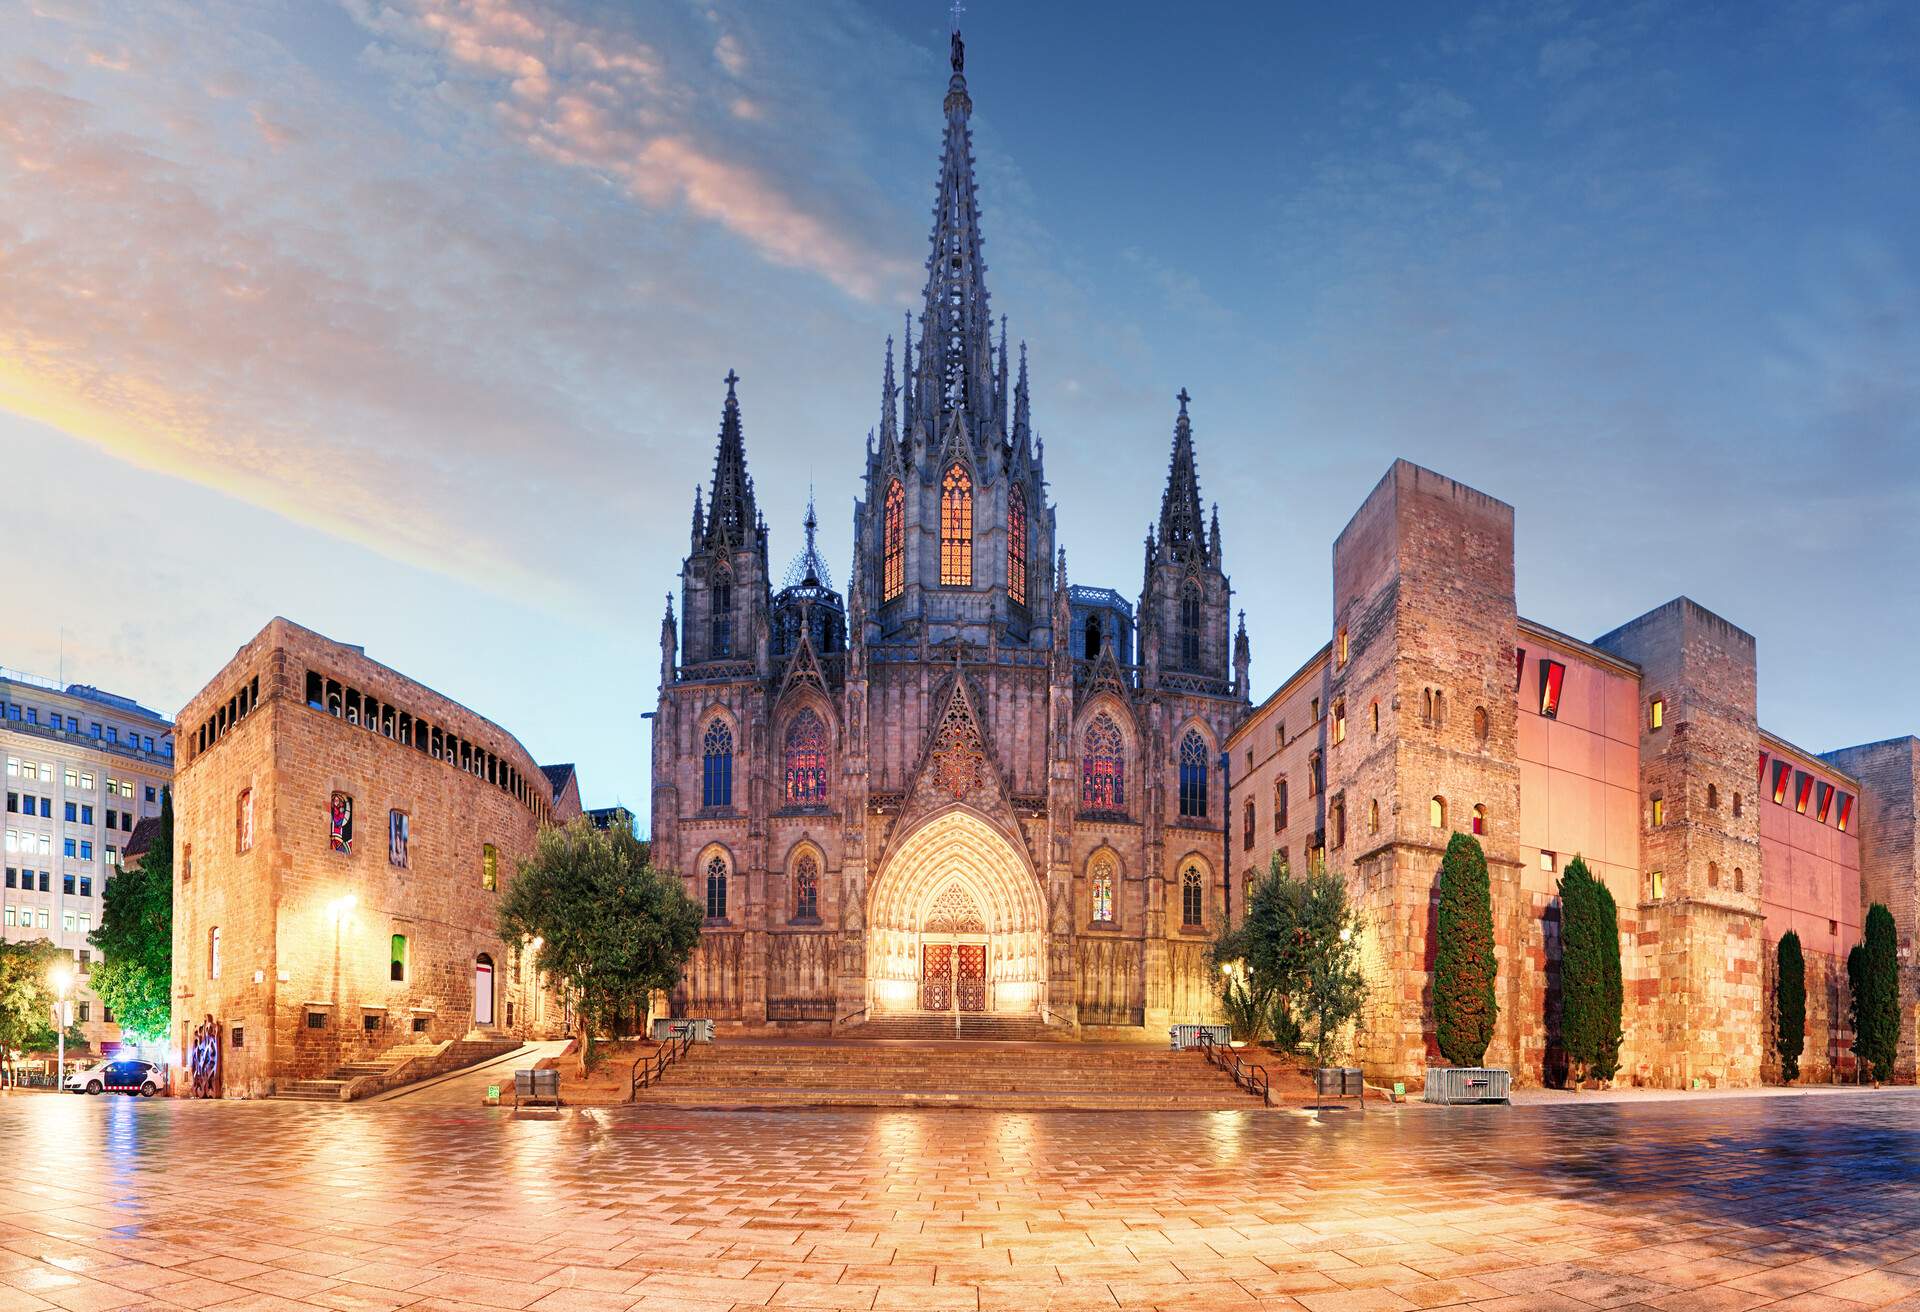 Barcelona Cathedral is a Gothic-style cathedral that features an arched entry, big stained-glass windows, exquisitely-designed spire, and two sharp pinnacles.